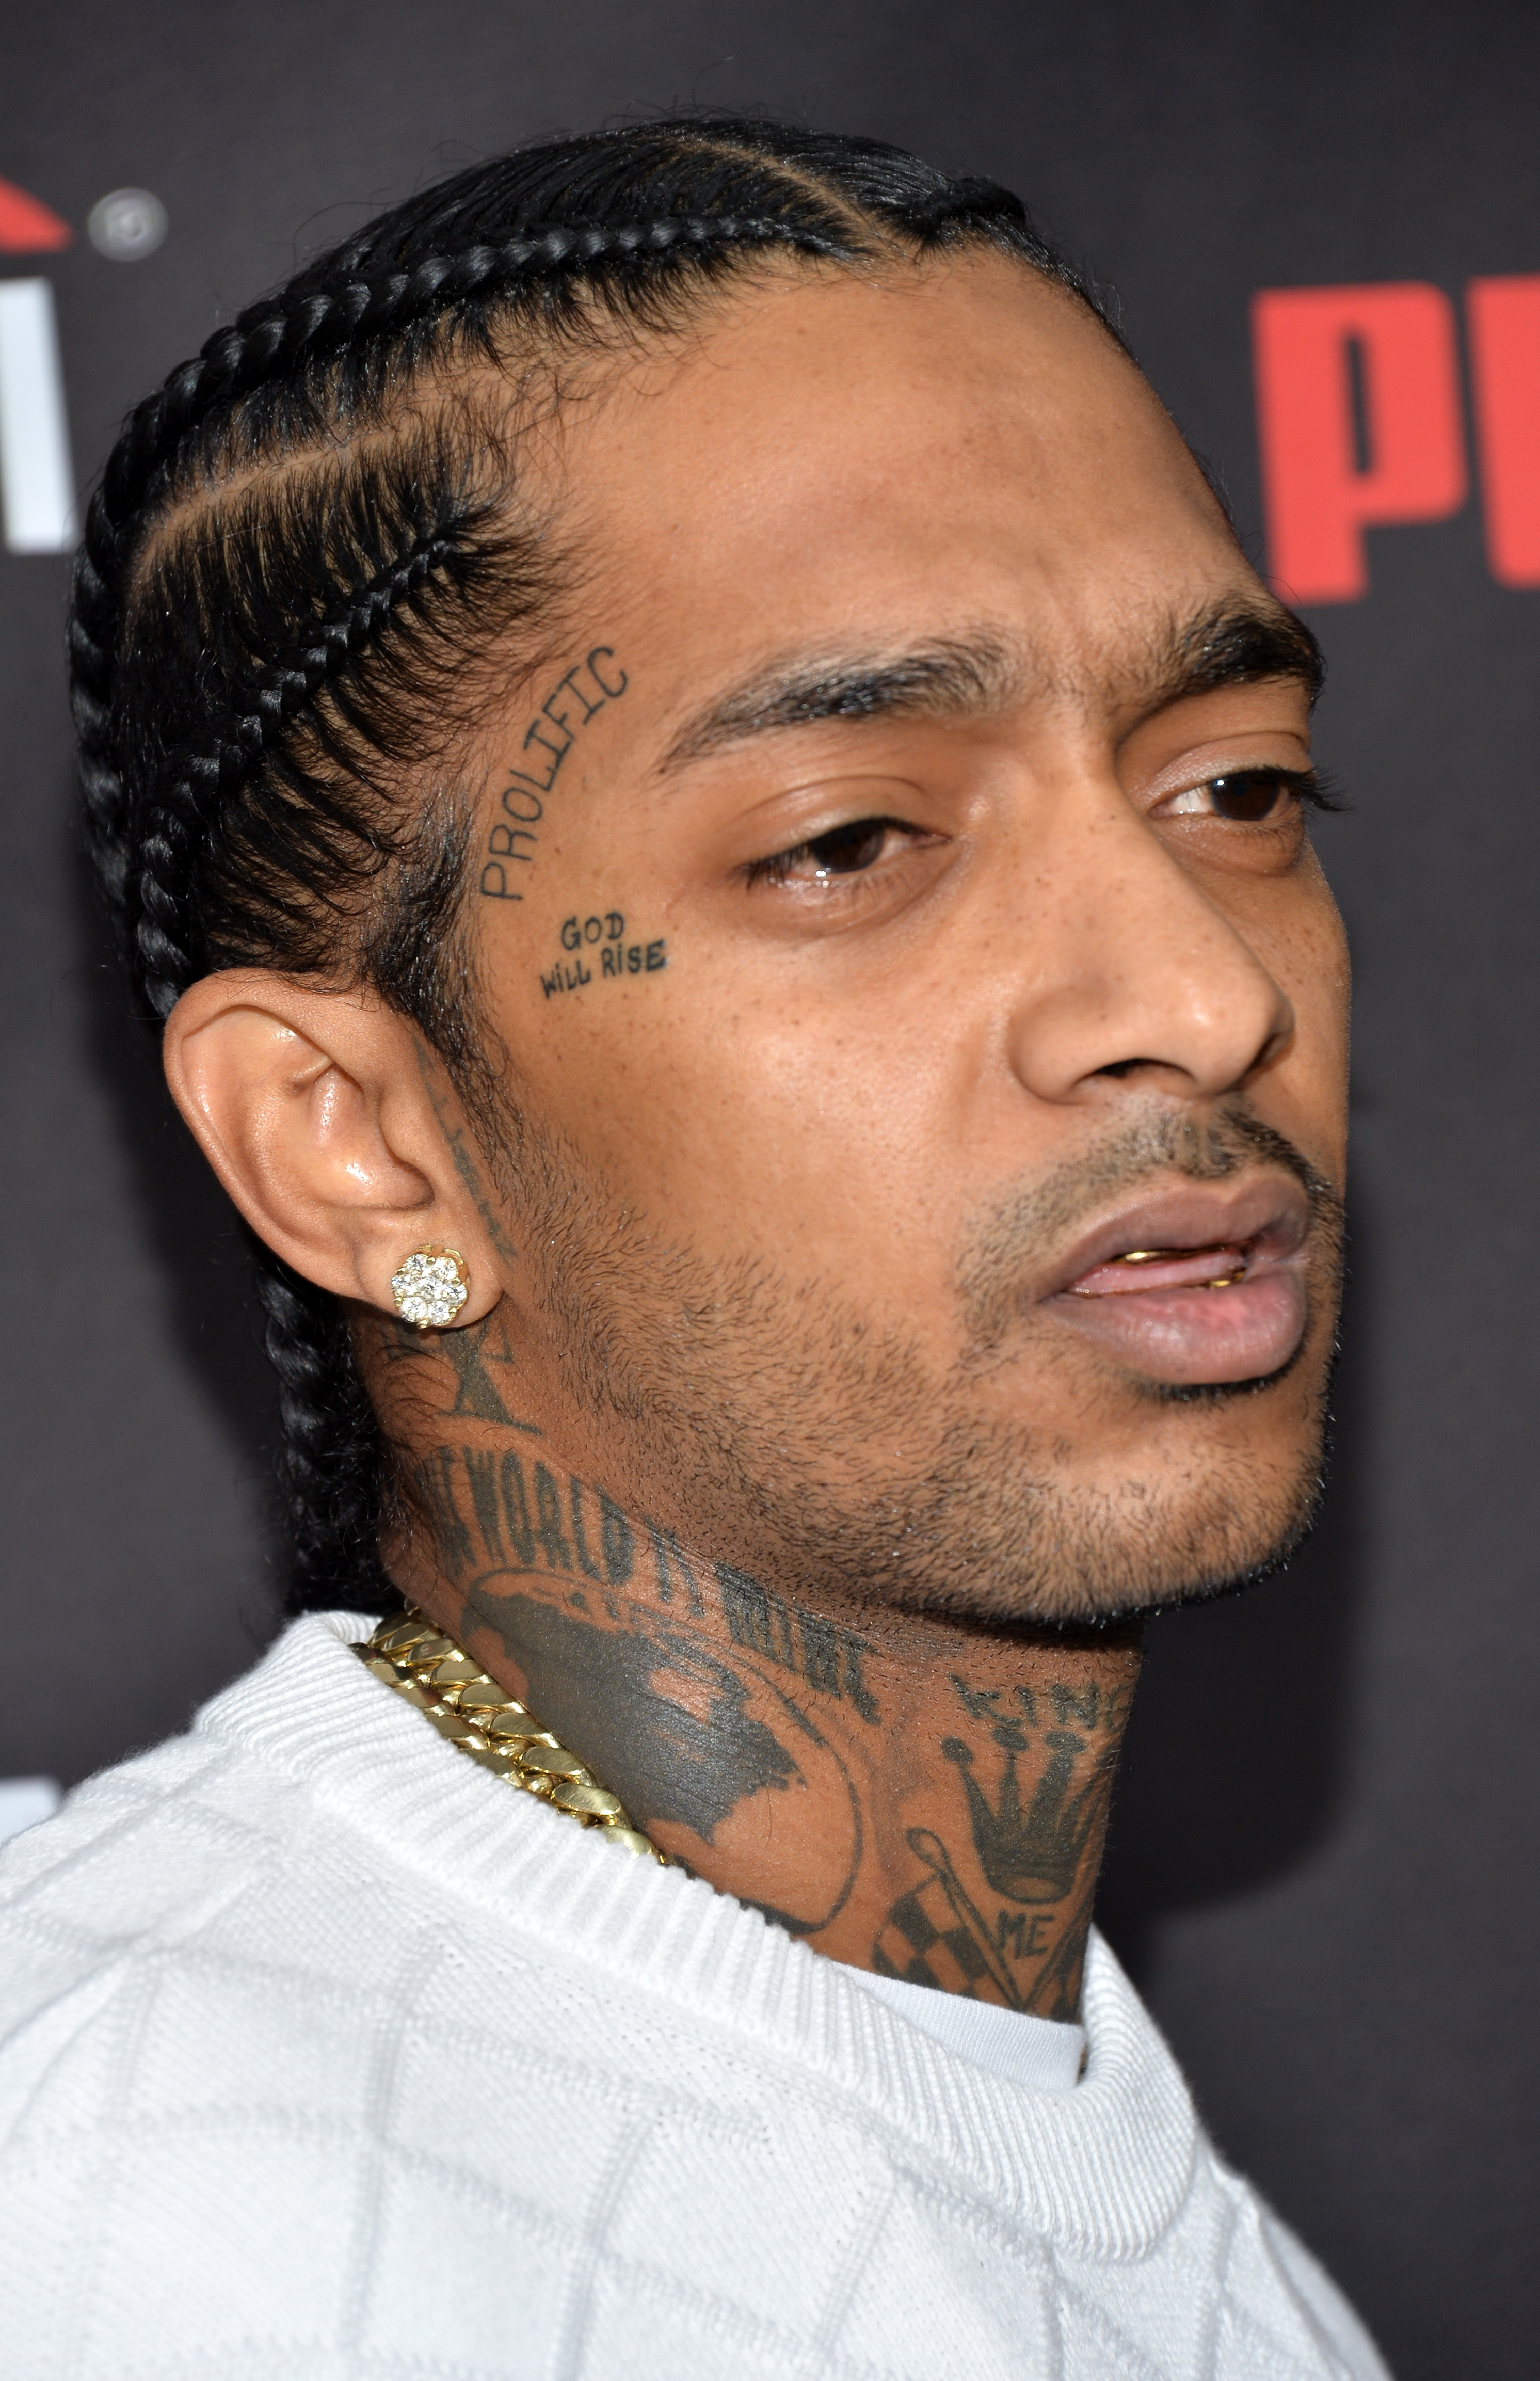 Nipsey Hussle's 31 Tattoos & Their Meaning - Body Art Guru | Lauren london,  Lauren london nipsey hussle, Hip hop fashion